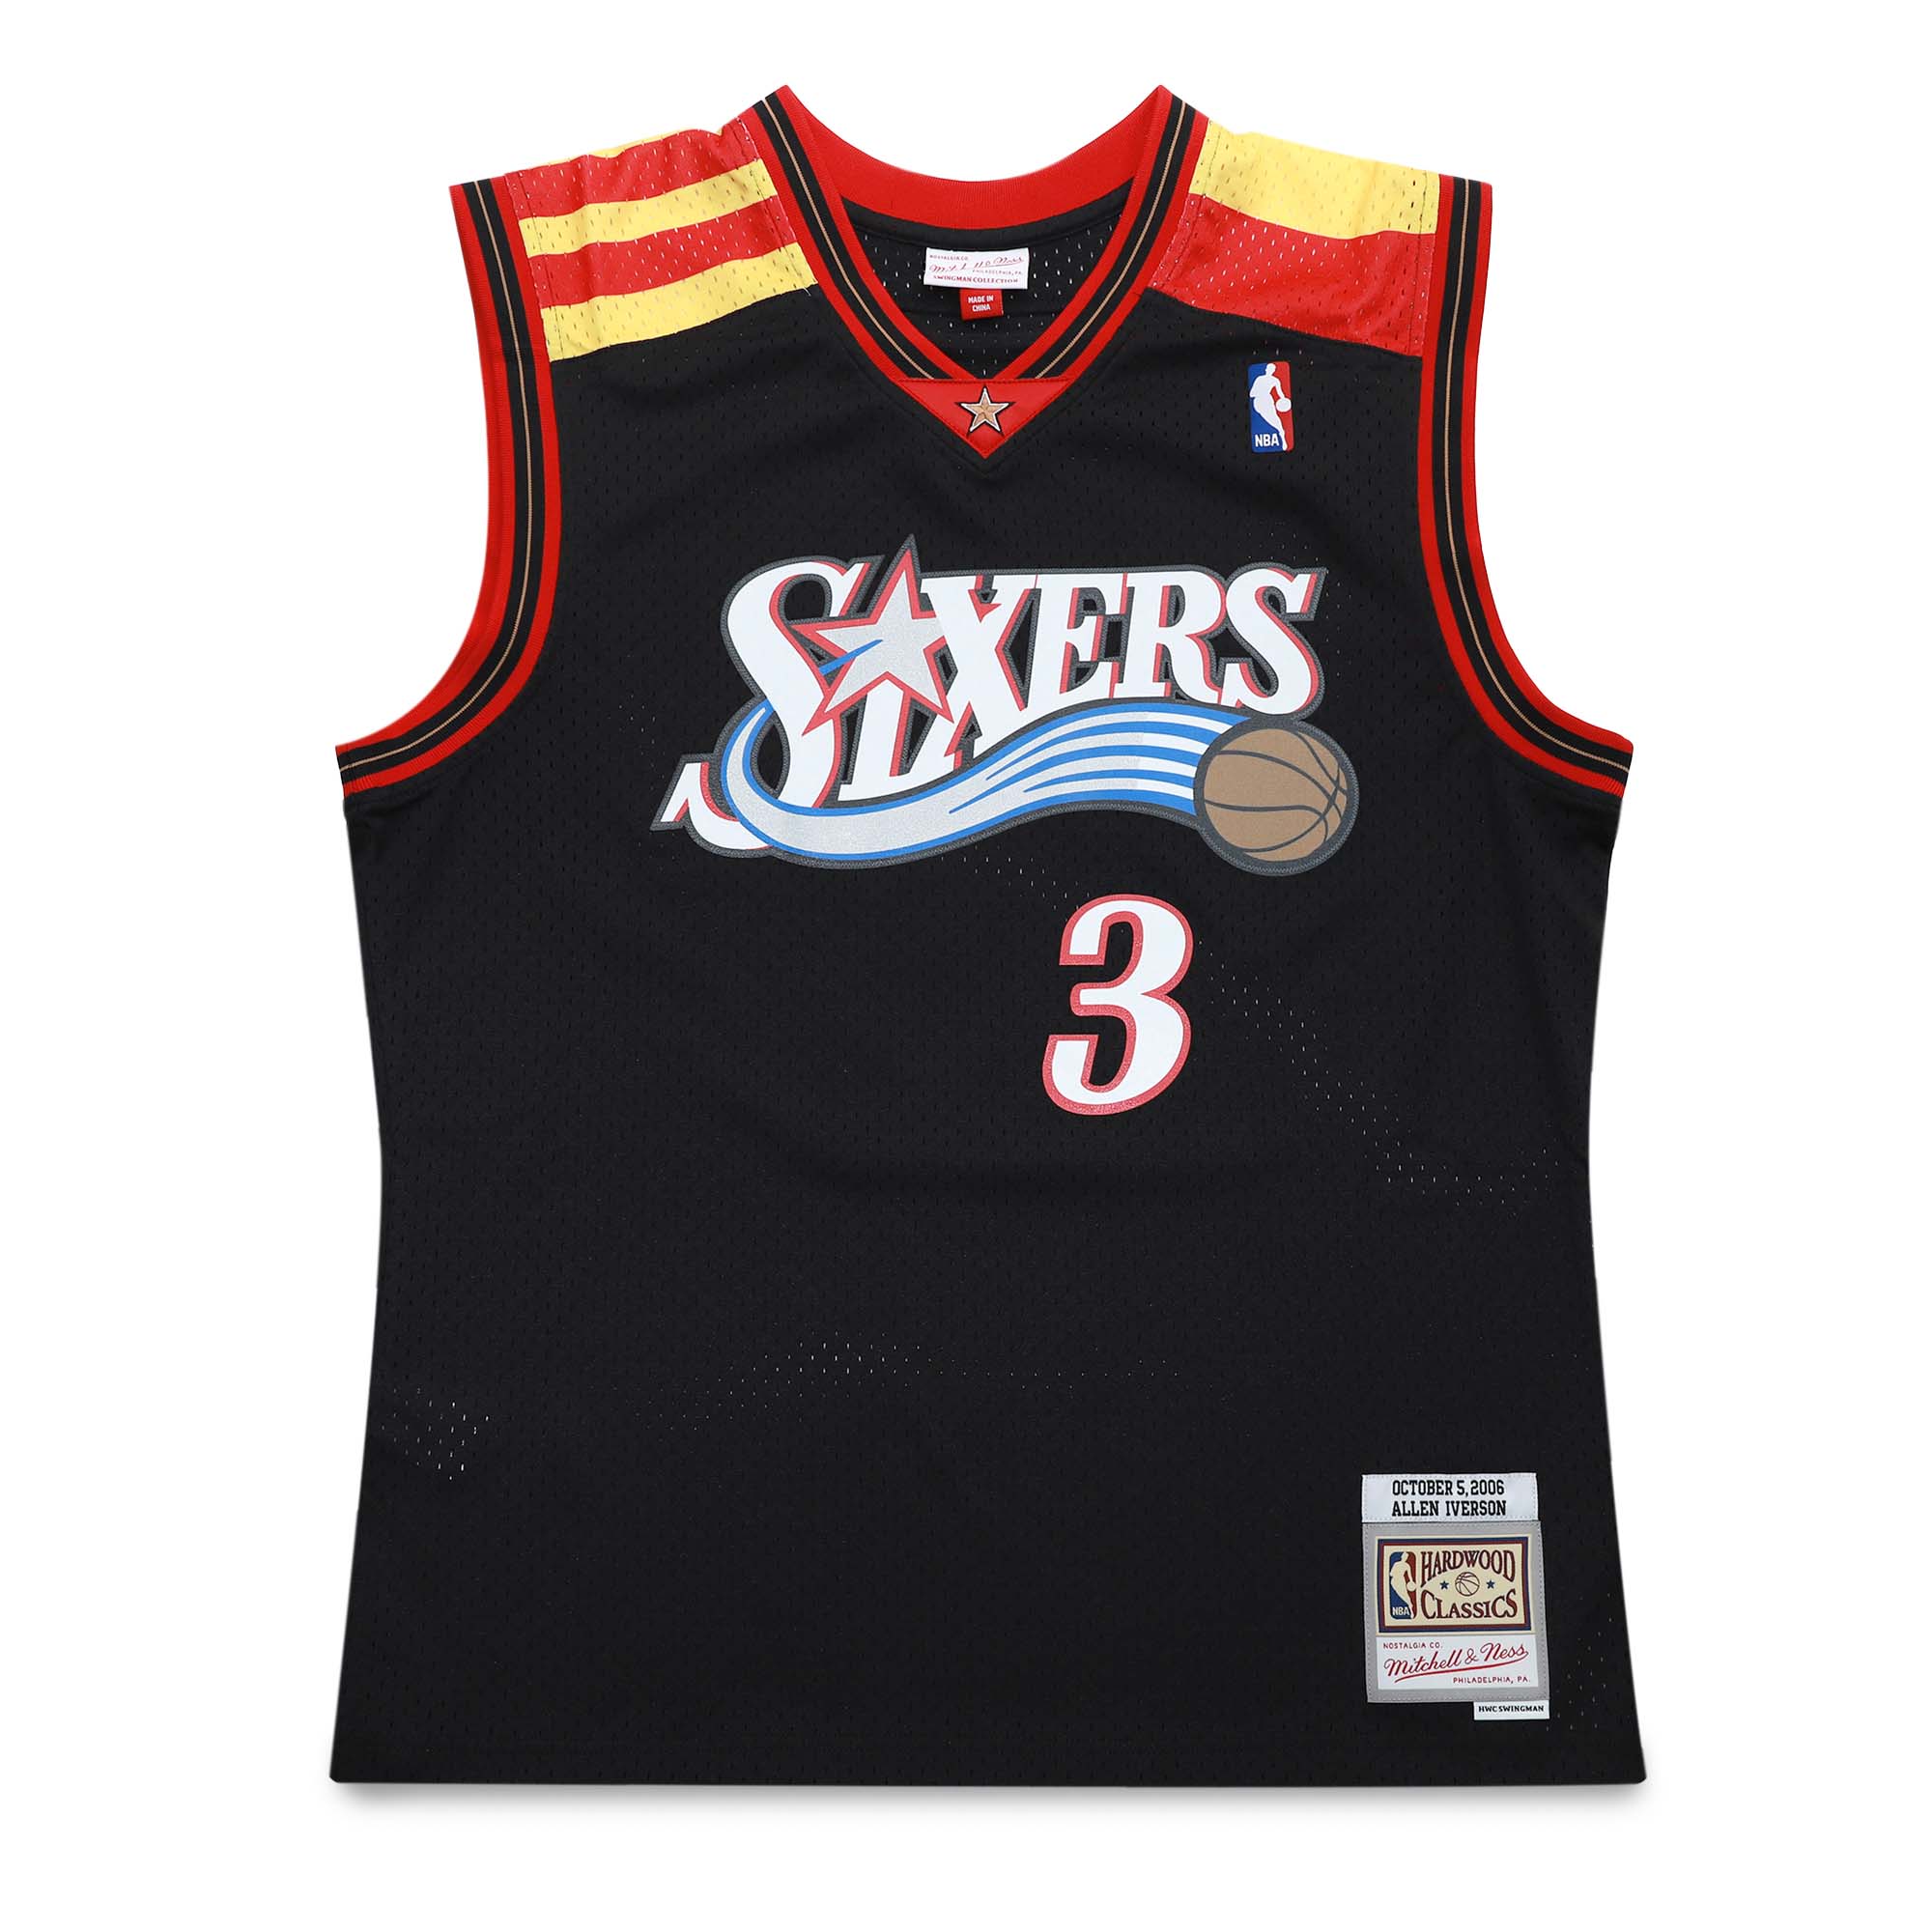 Sold at Auction: 2004-05 Allen Iverson Philadelphia 76ers Hardwood Classic  Syracuse Nats professional model jersey.